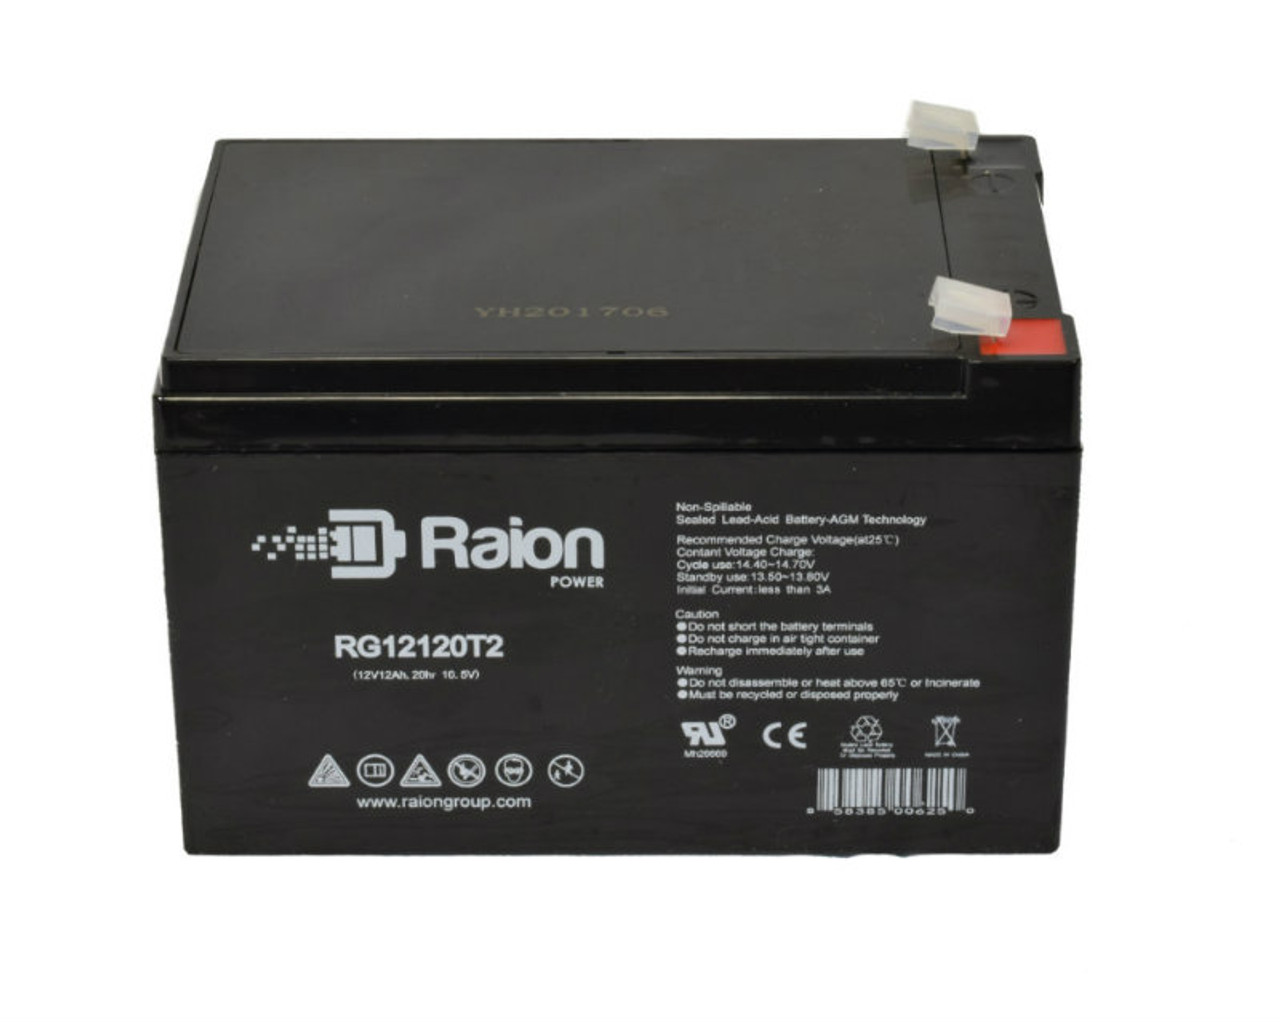 Raion Power RG12120T2 SLA Battery for Merits Health Products Pioneer 1 S235 Wheelchairs